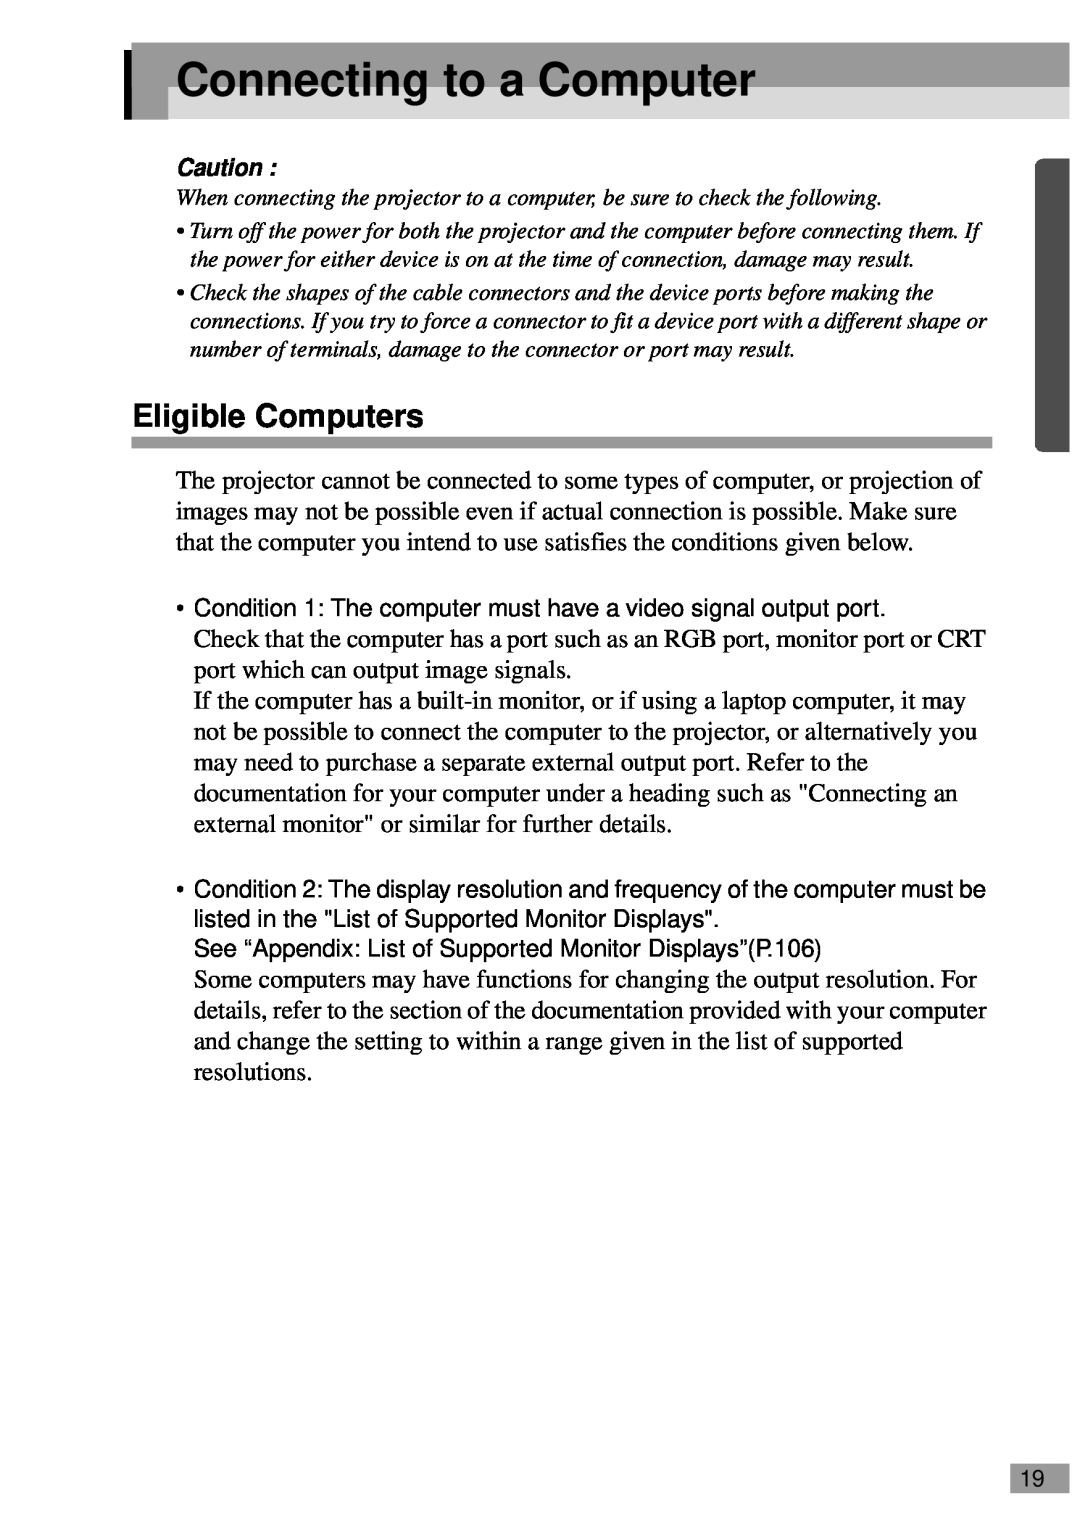 Epson ELP-820, ELP-811, ELP-600, ELP-800UG, ELP-810UG, EMP-810UG, EMP-811, EMP-820 Connecting to a Computer, Eligible Computers 